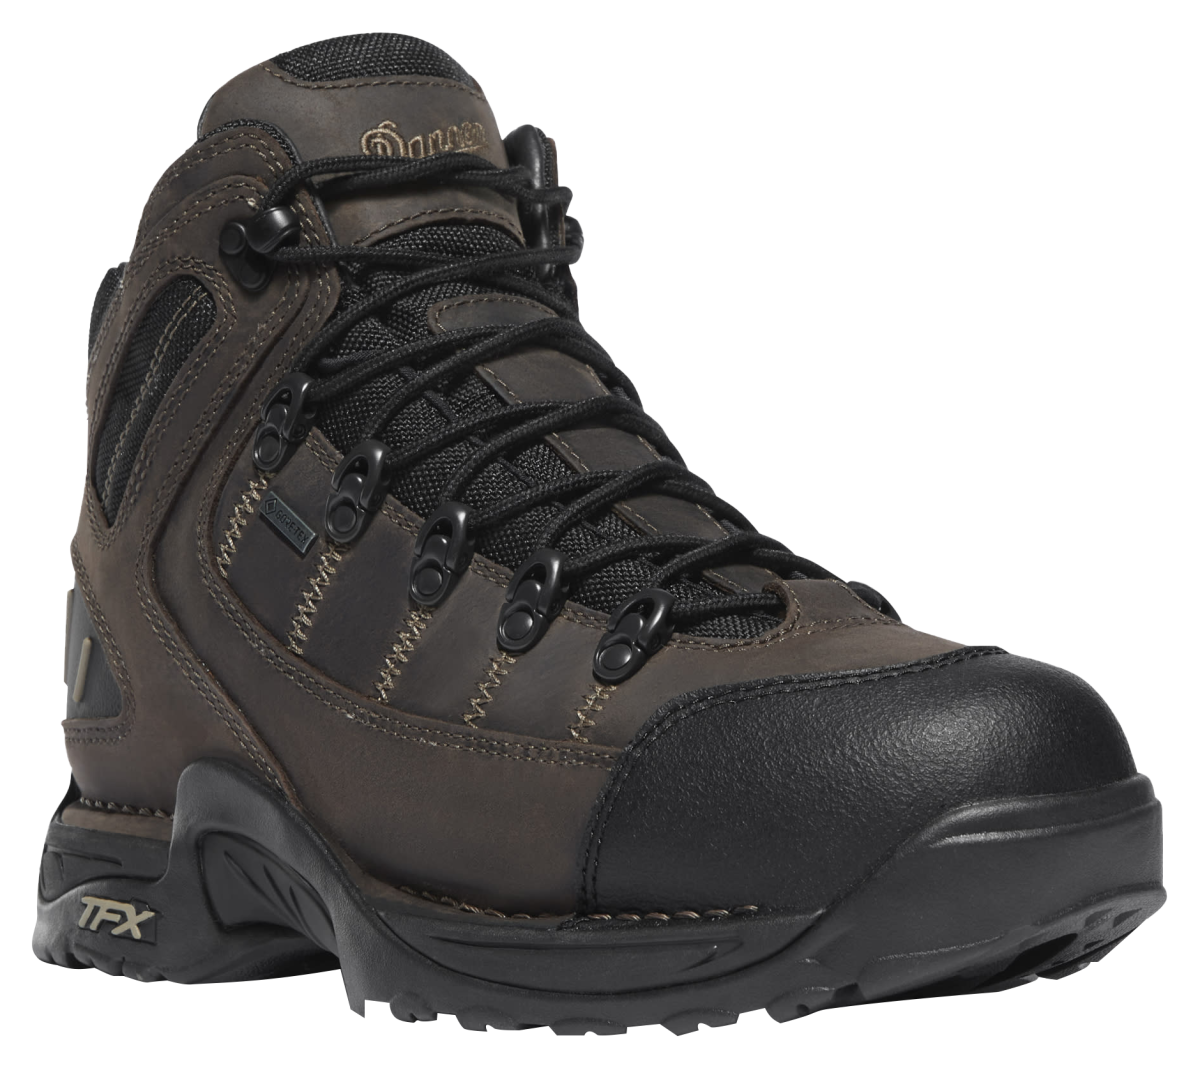 Danner 453 GORE-TEX Waterproof Hiking Boots for Men - Loam Brown/Chocolate Chip - 7.5M